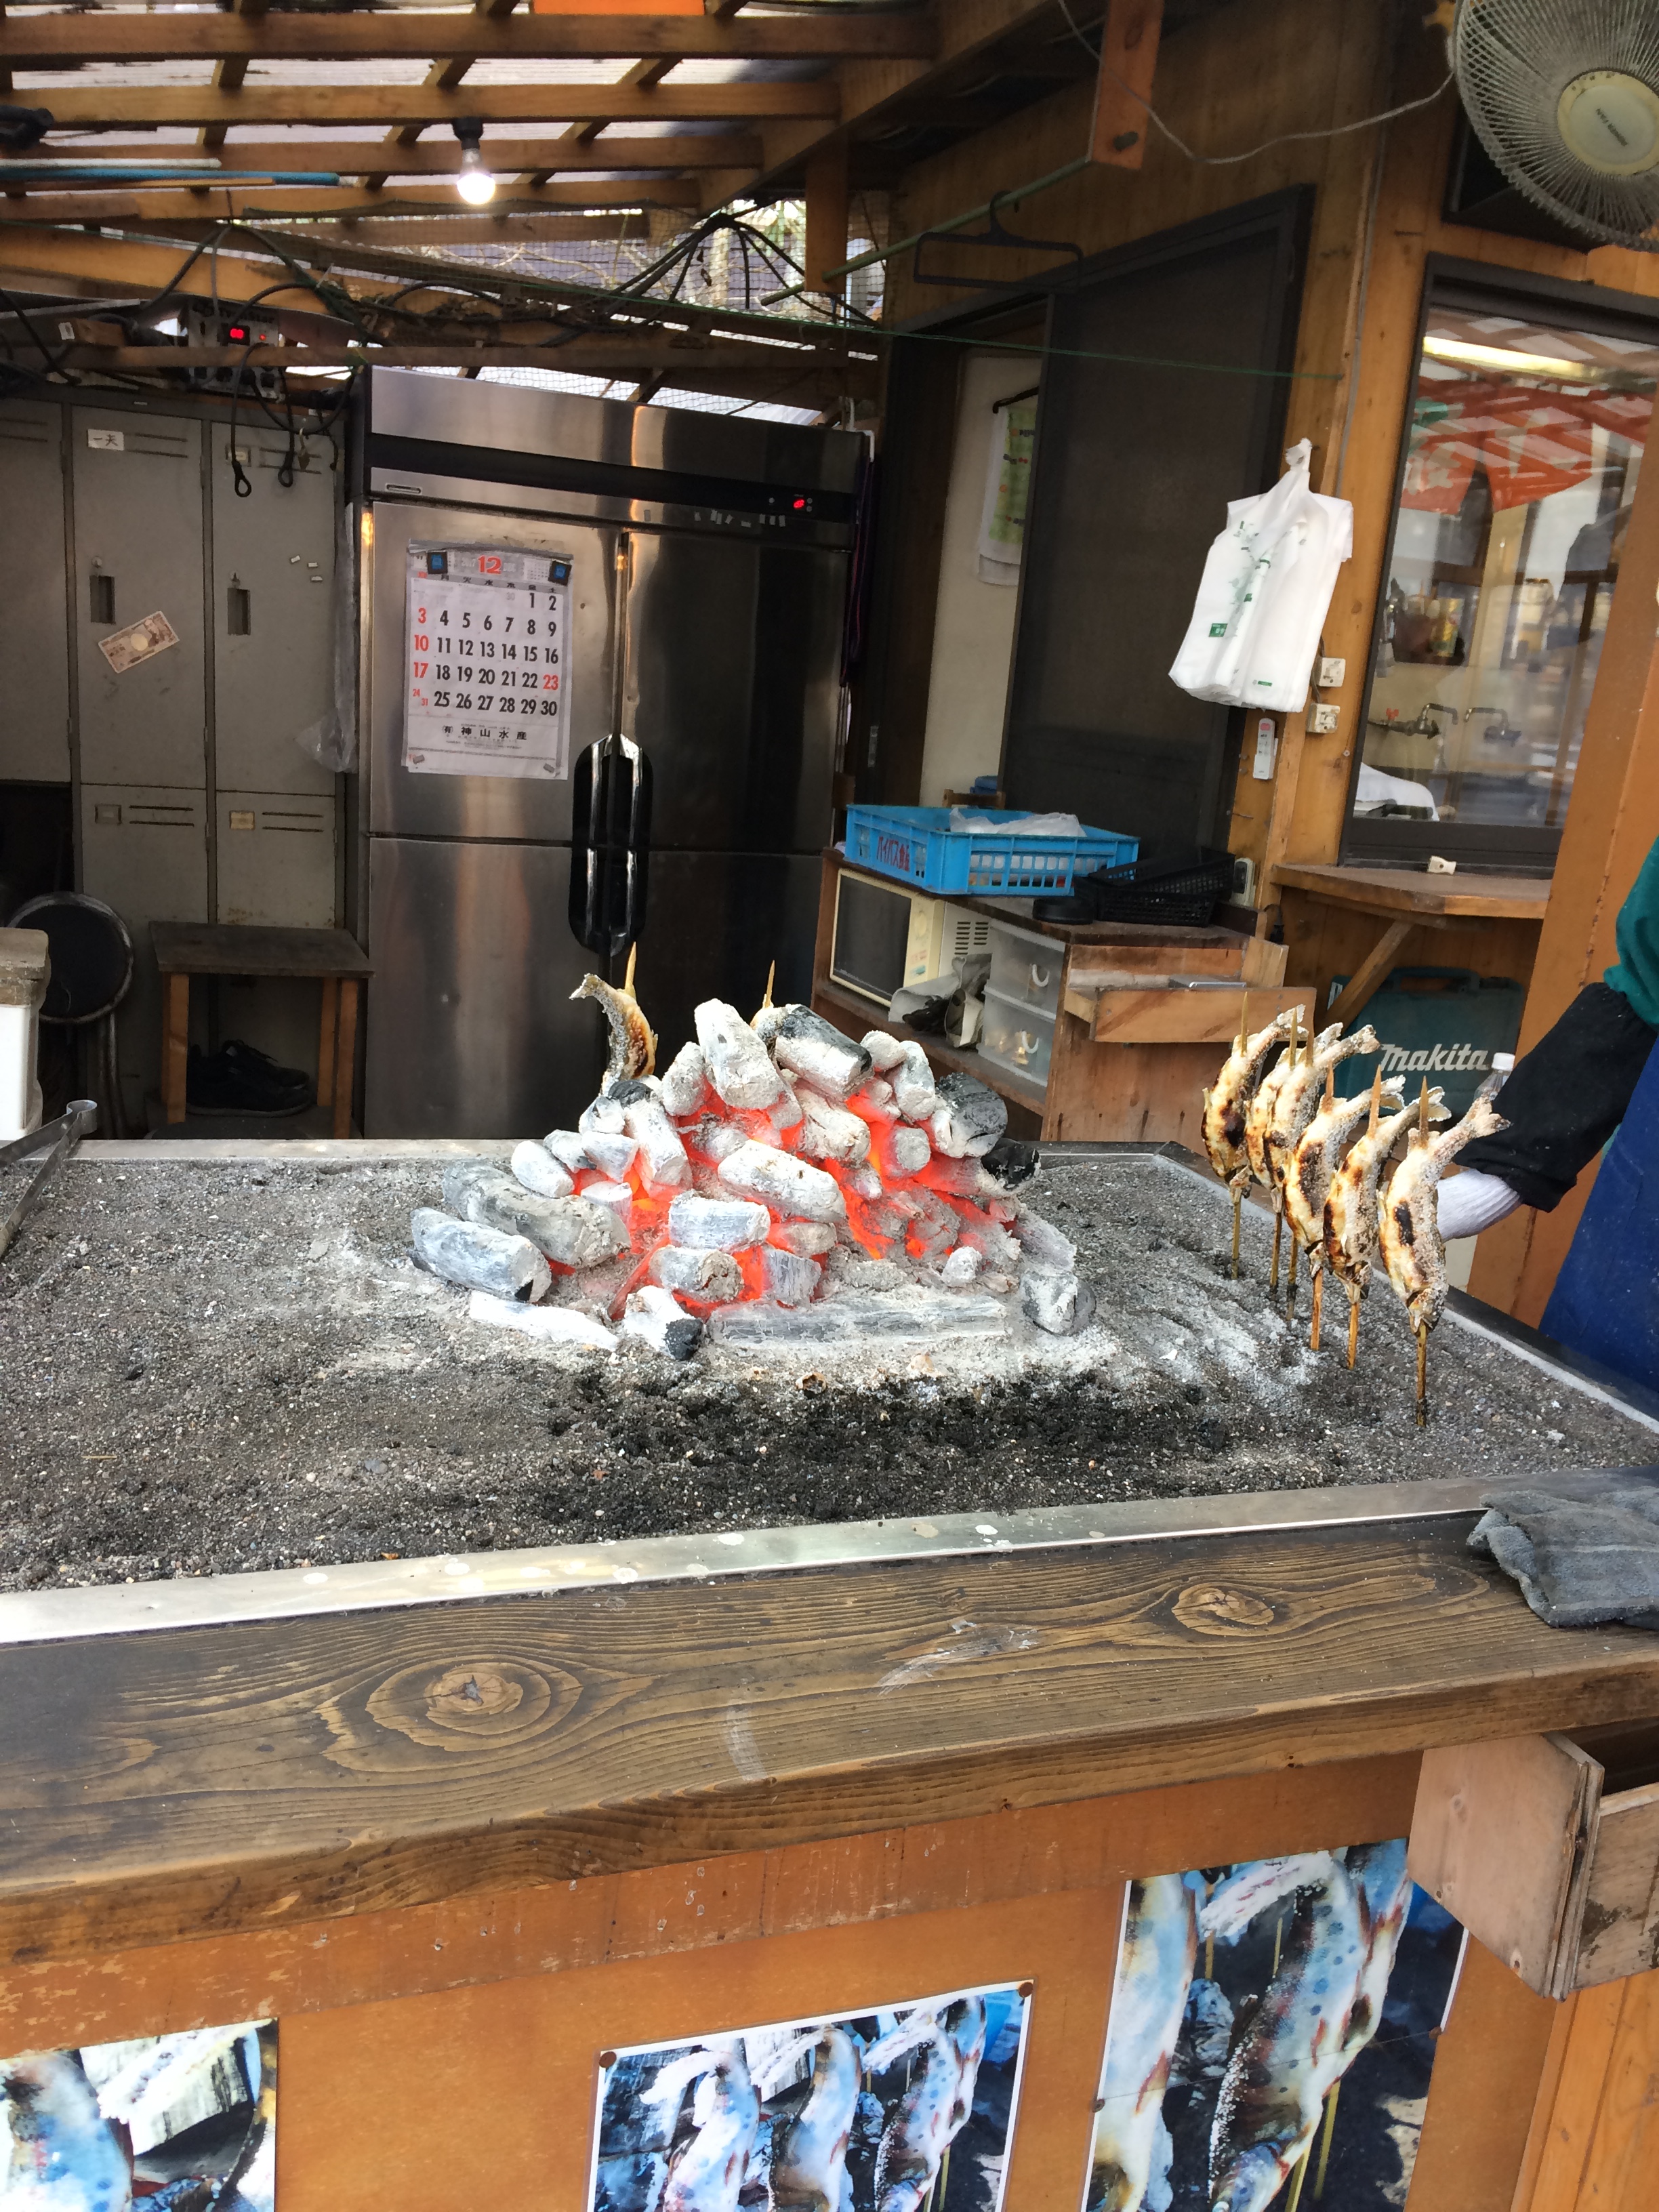 A heap of white coals sit atop a grate on a trolley. In the centre of the coals there is an orange colour from the heat. To the right side of and behind the pile of coals are rows of small whole fish, skewered through by sticks. A the back of the stall there are fridges visible and a flimsy roof supported b wooden beams is also seen.